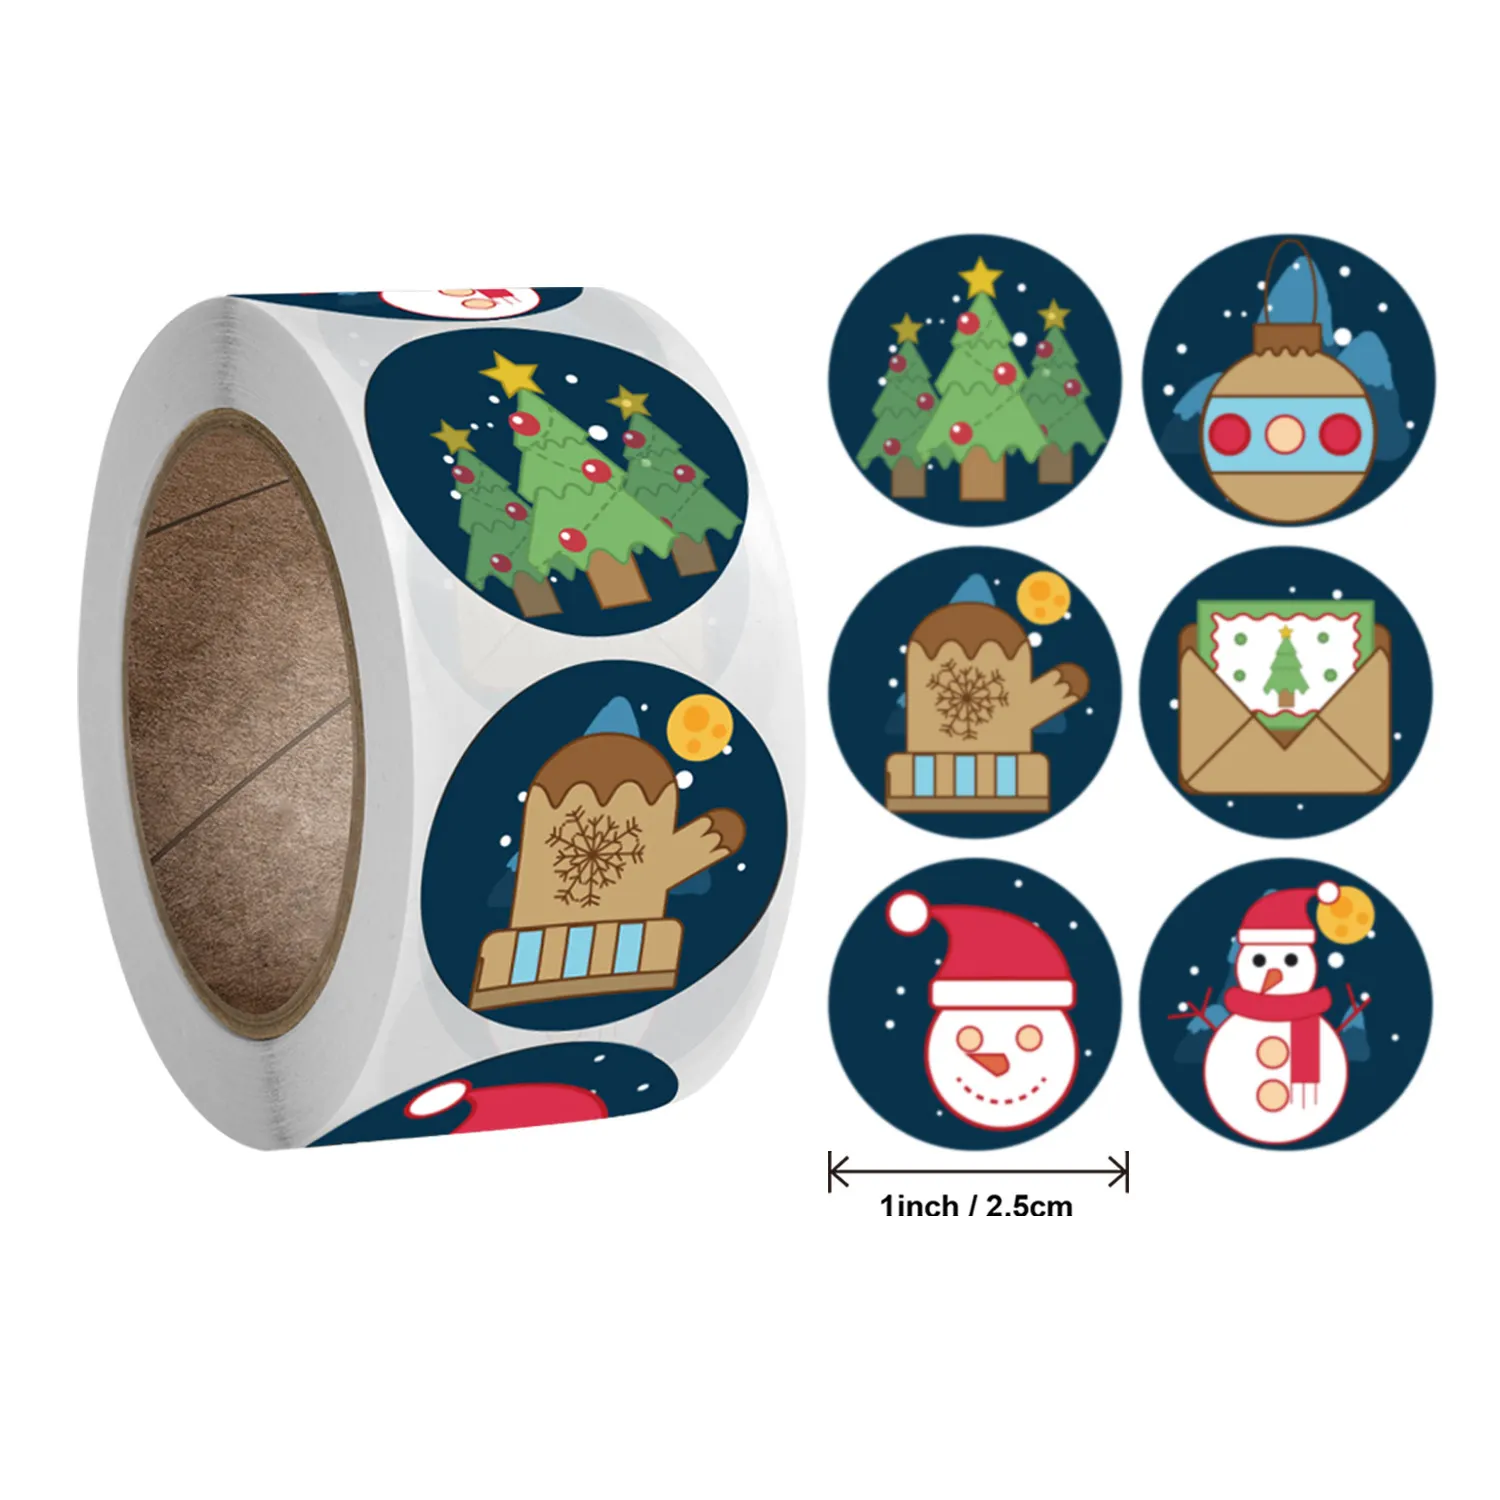 Ychon Custom Printed Round Adhesive Paper Waterproof Christmas Copper Cute Cartoon Roll Gift Anime Stickers Label